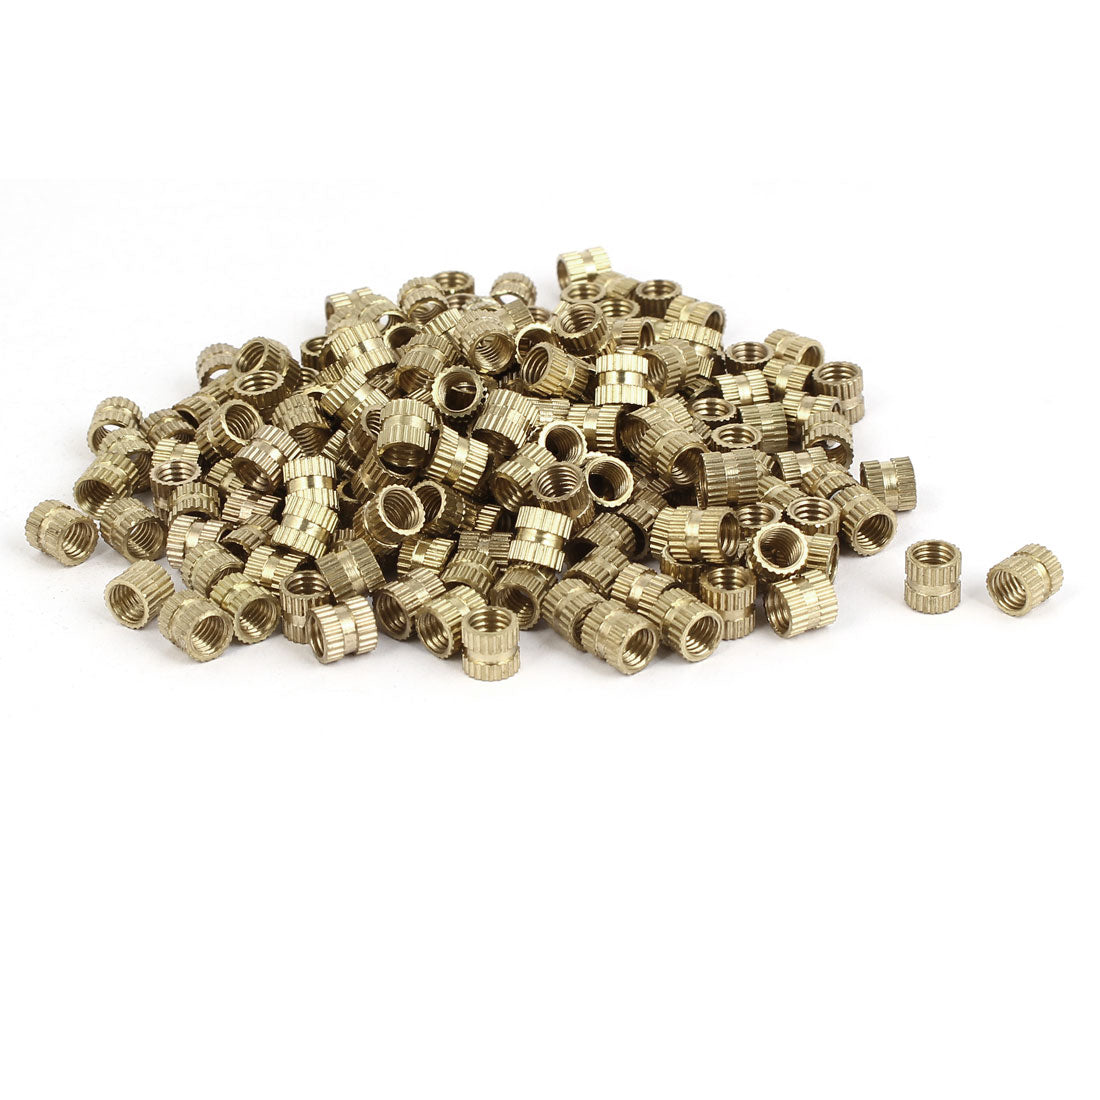 uxcell Uxcell M5x0.8mm Female Brass Knurled Threaded Insert Embedment Nut for 3D Printer 100Pcs